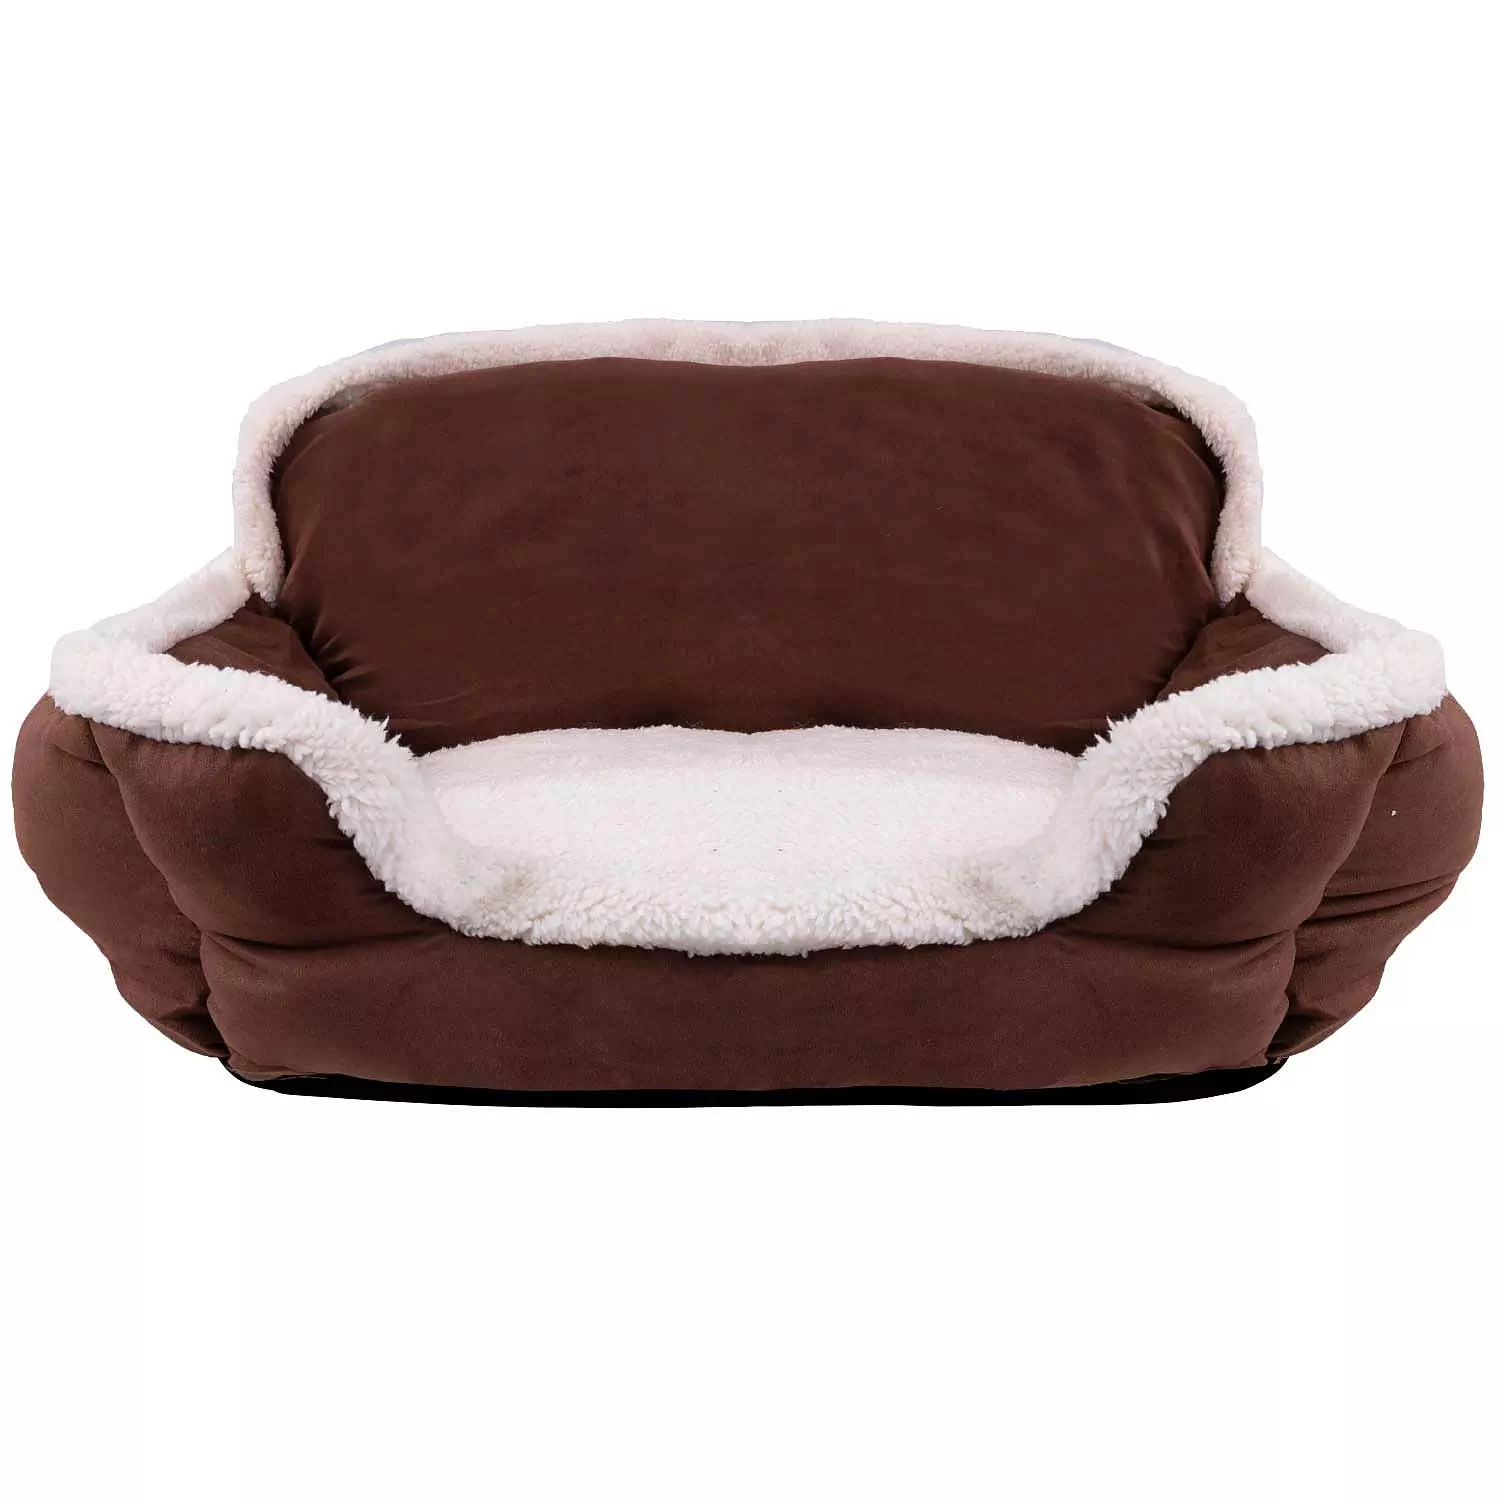 Faux suede, square pet bed, medium, brown & white